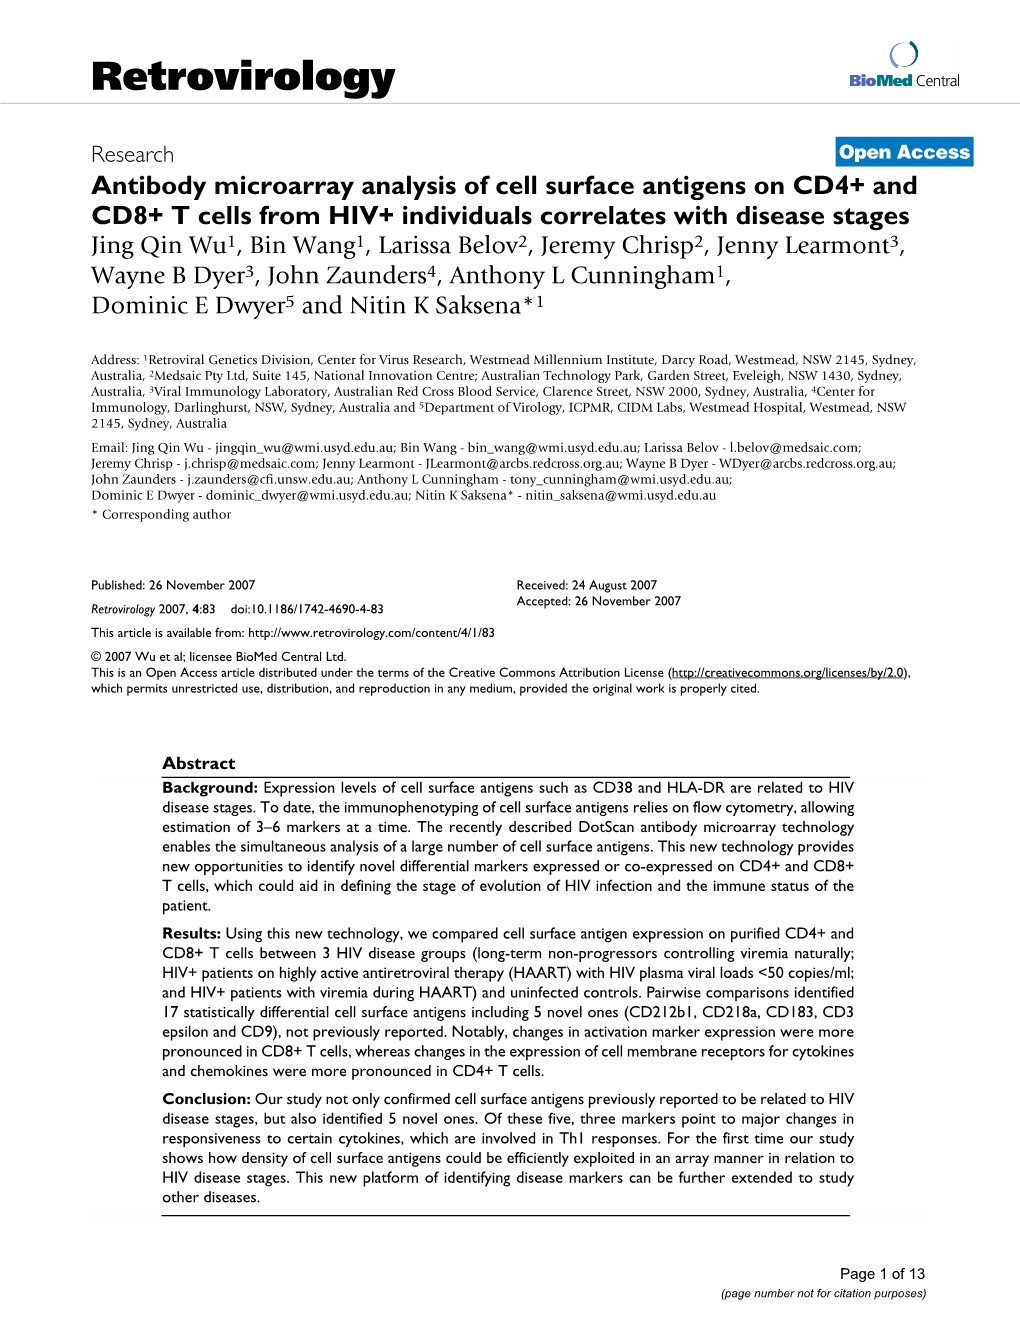 Antibody Microarray Analysis of Cell Surface Antigens on CD4+ and CD8+ T Cells from HIV+ Individuals Correlates with Disease Stages